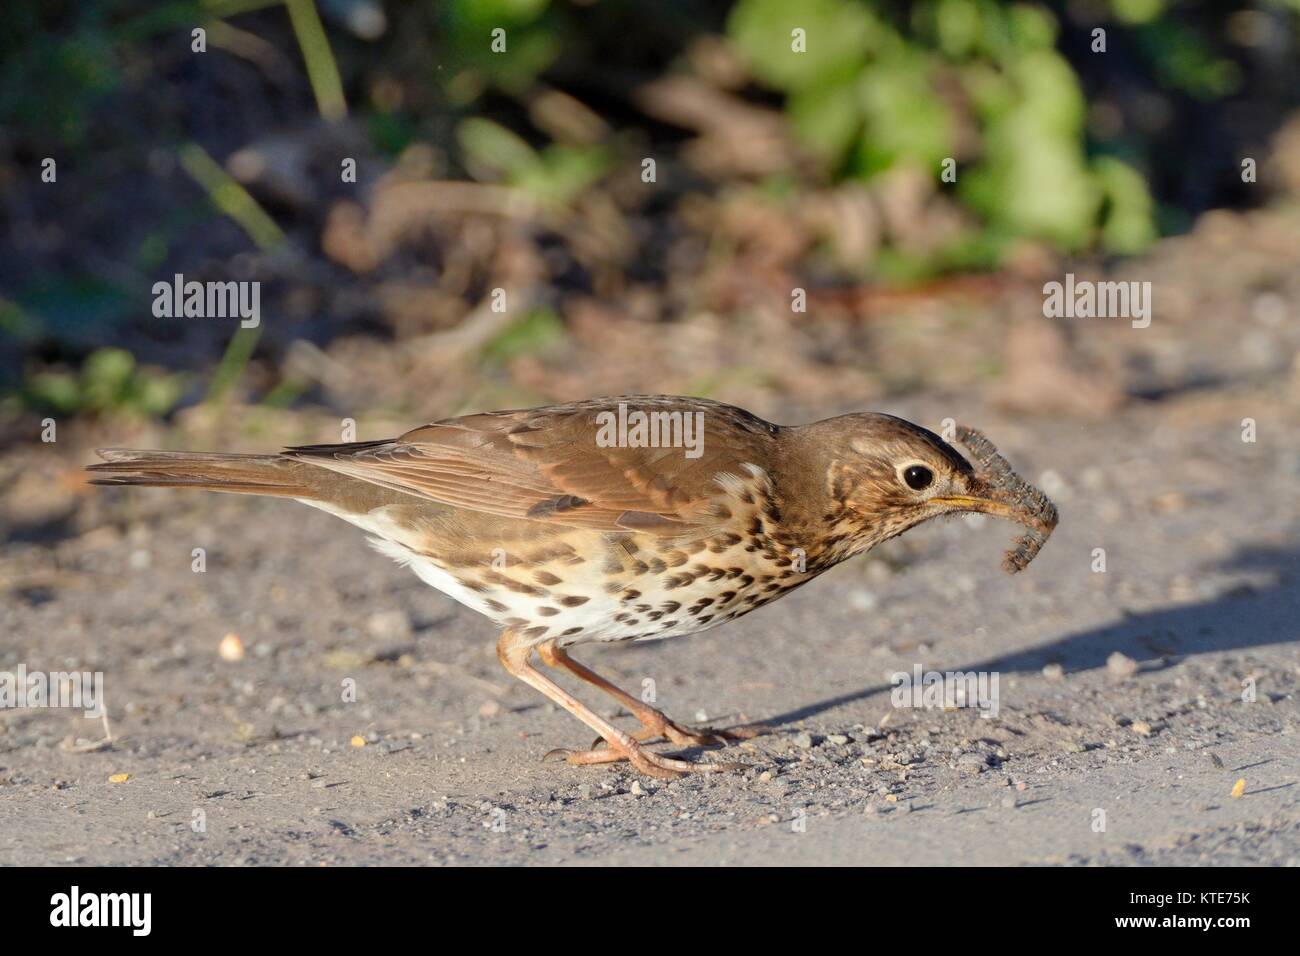 Song thrush (Turdus philomelos) manipulating hairy caterpillar prey on a road side, Cornwall, UK, April. Stock Photo